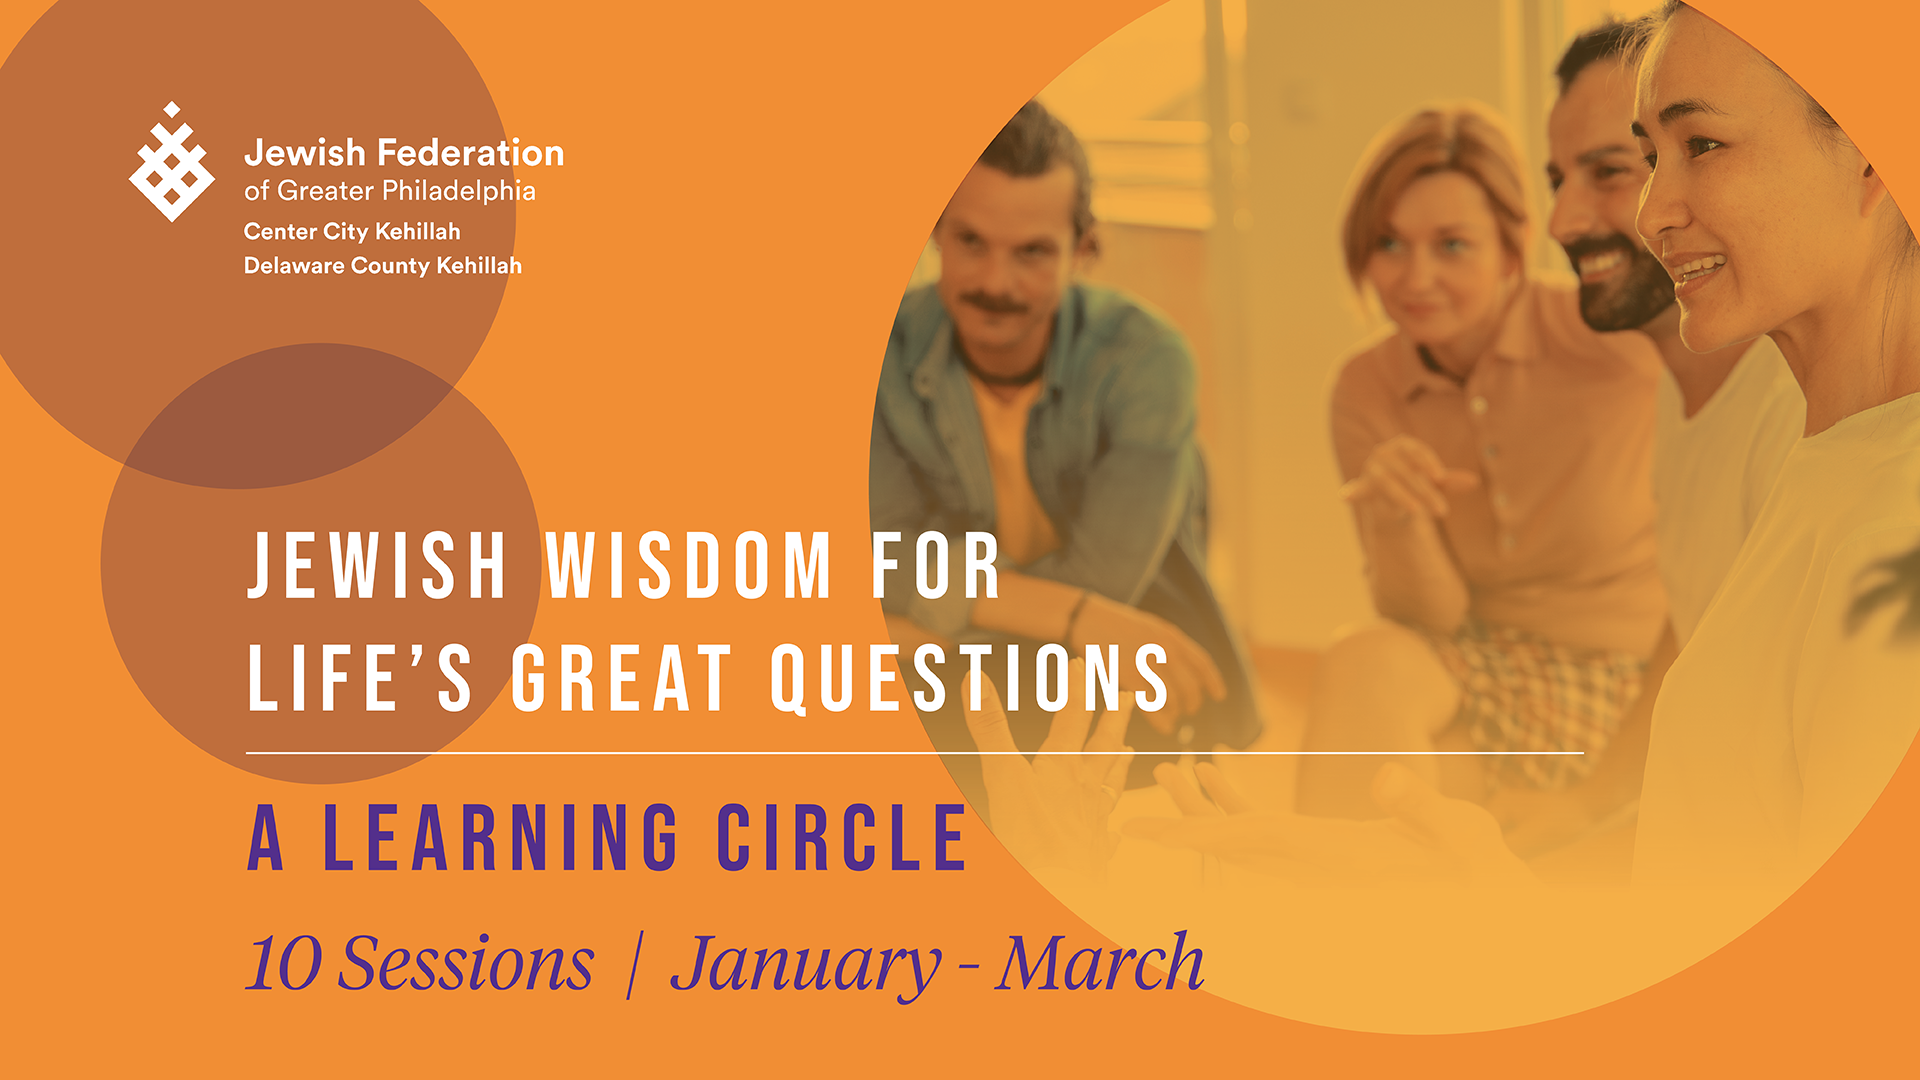 Join the Circle: A Virtual Program to Answer Life’s Great Questions